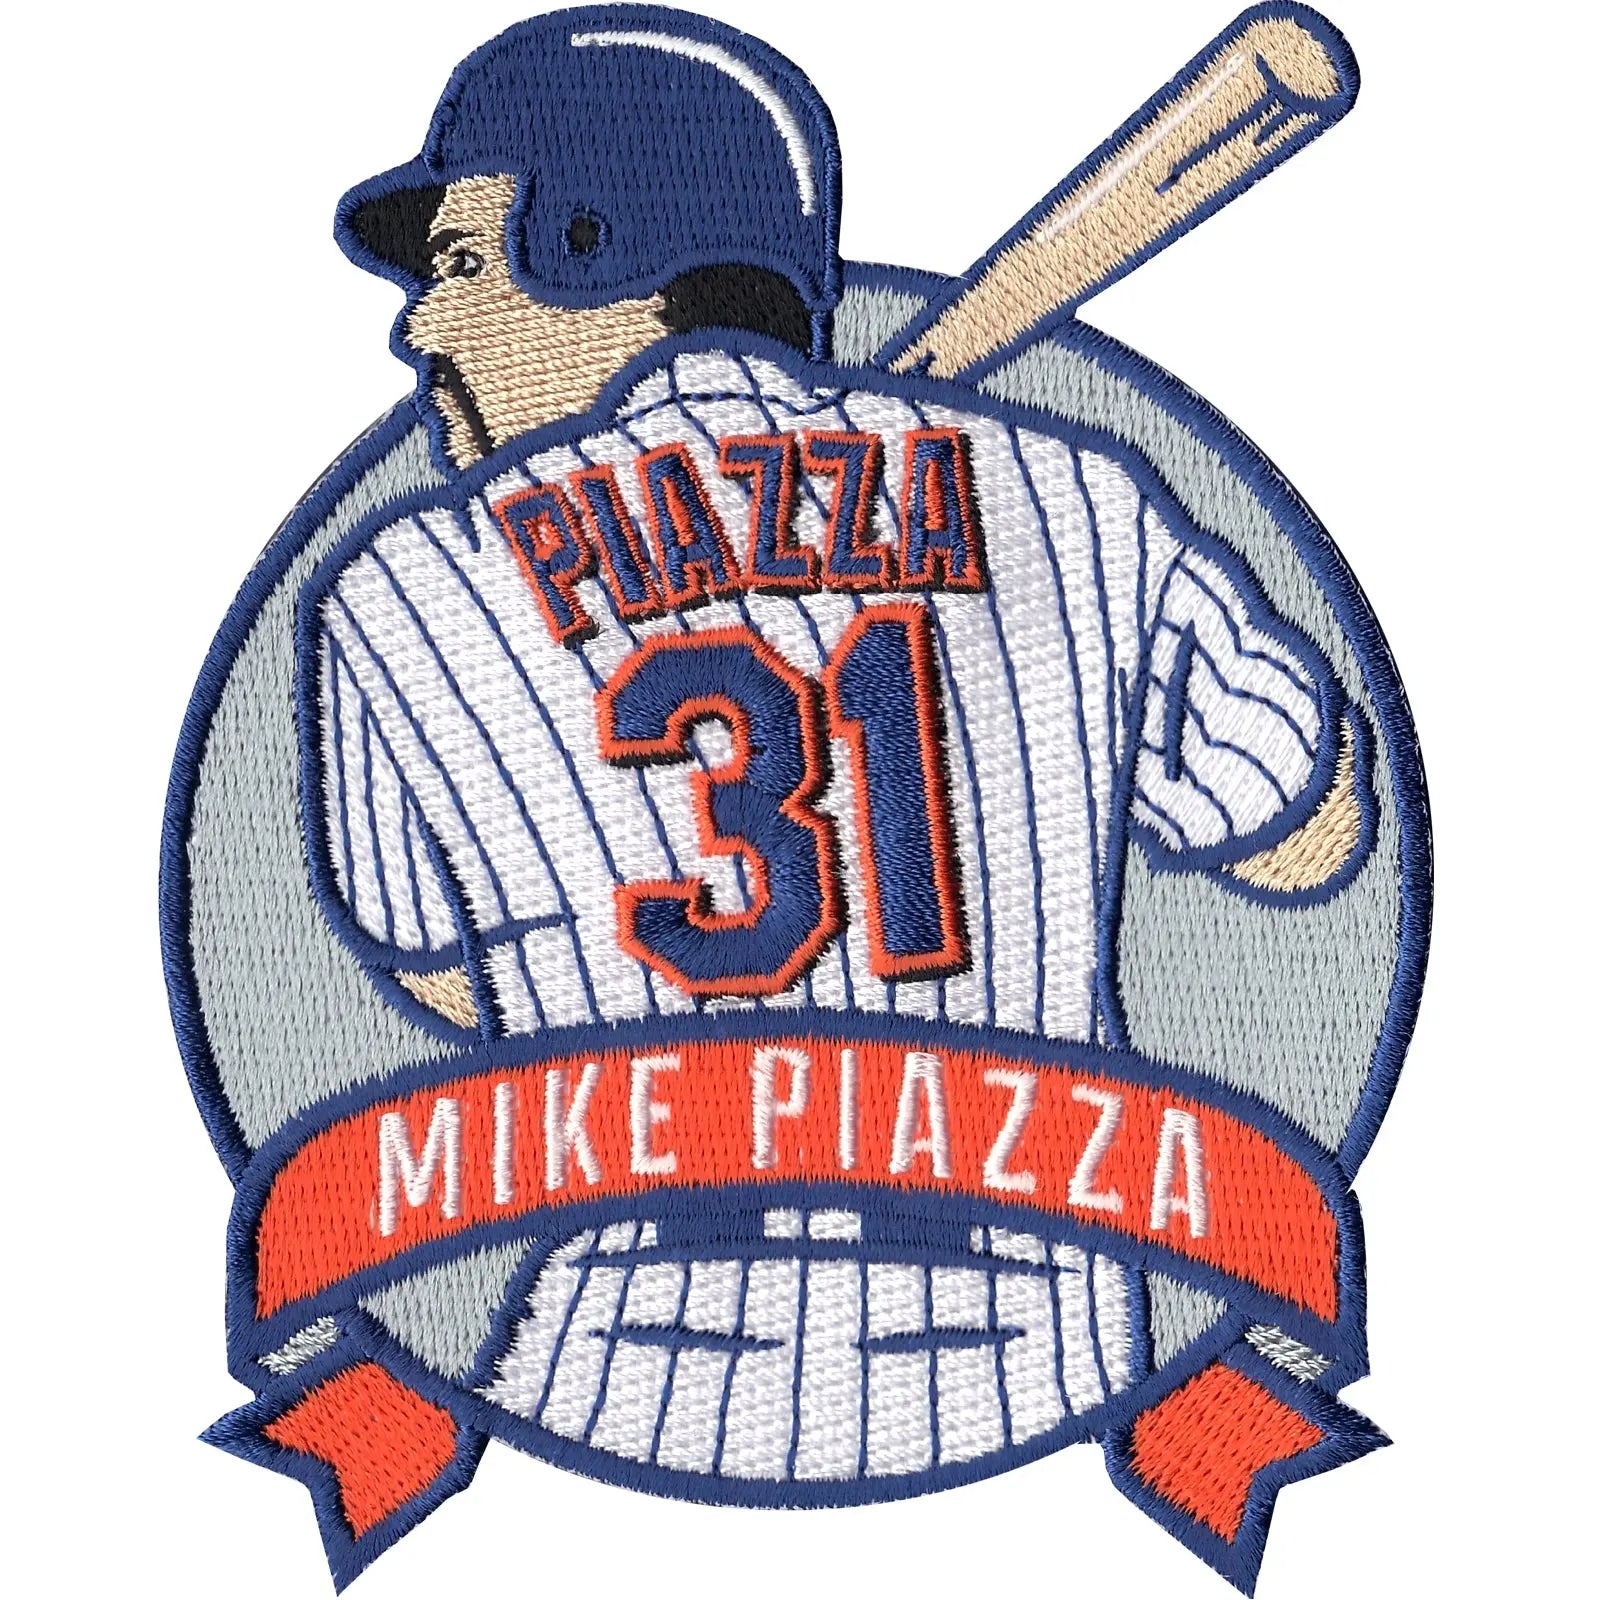 New York Mets Mike Piazza Retirement Jersey Patch by Patch Collection